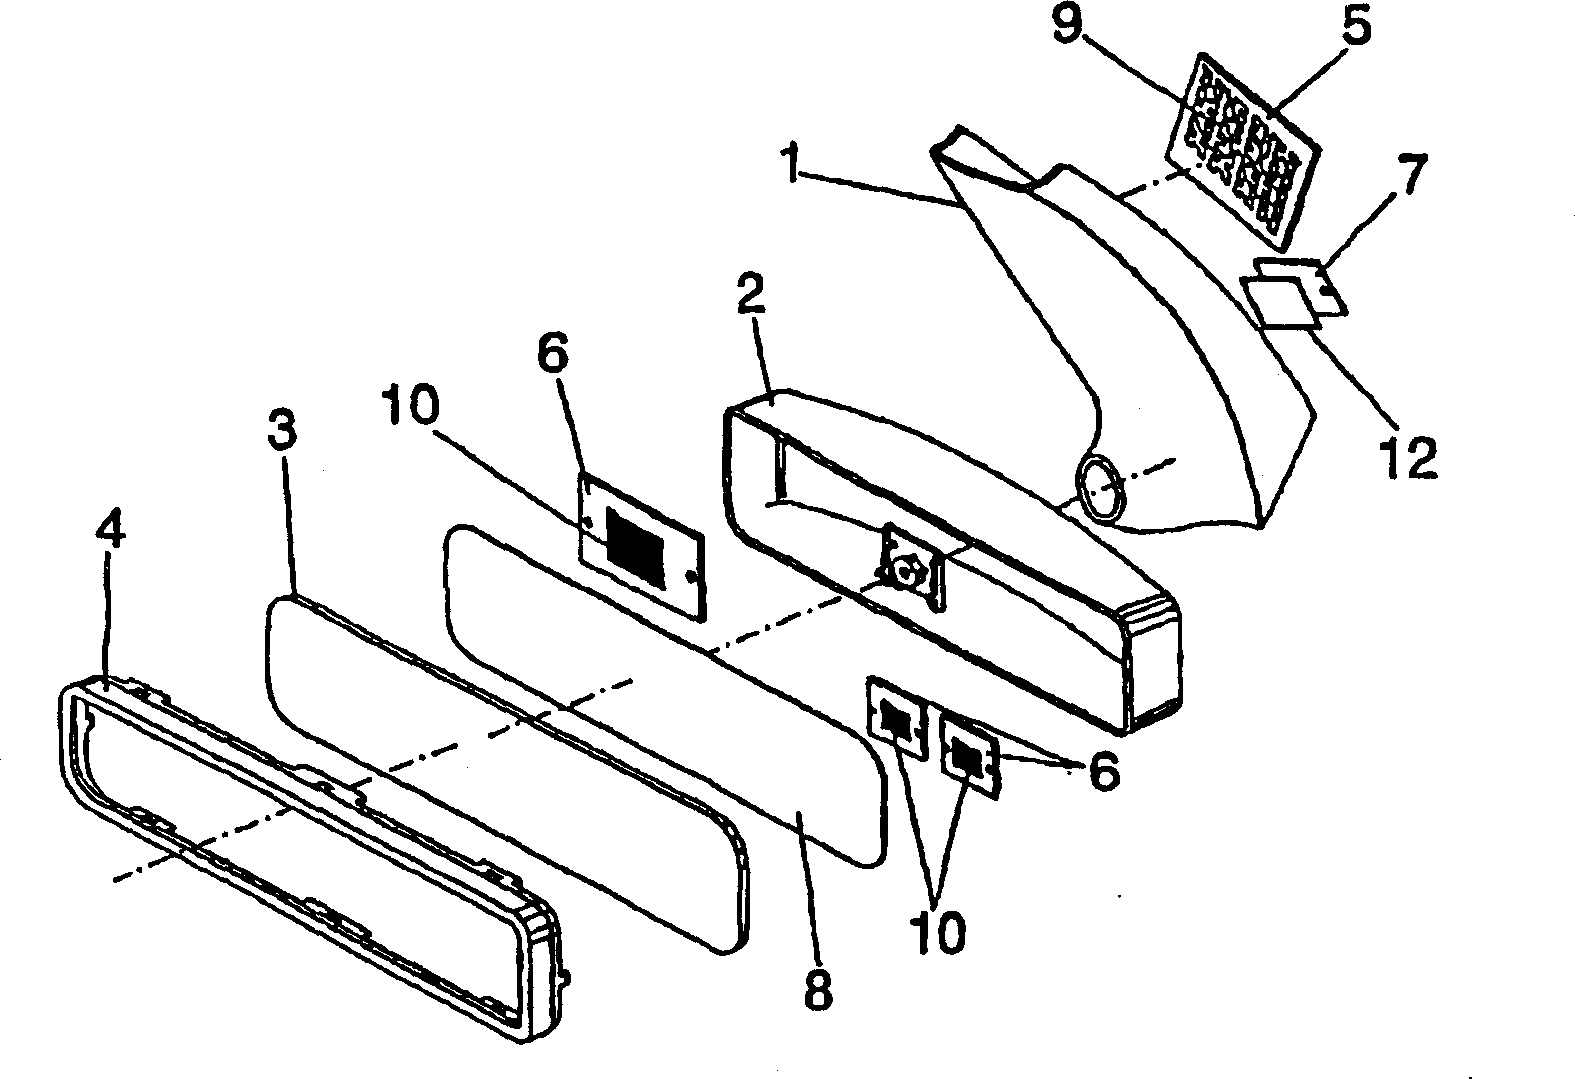 Antenna system for a motor vehicle